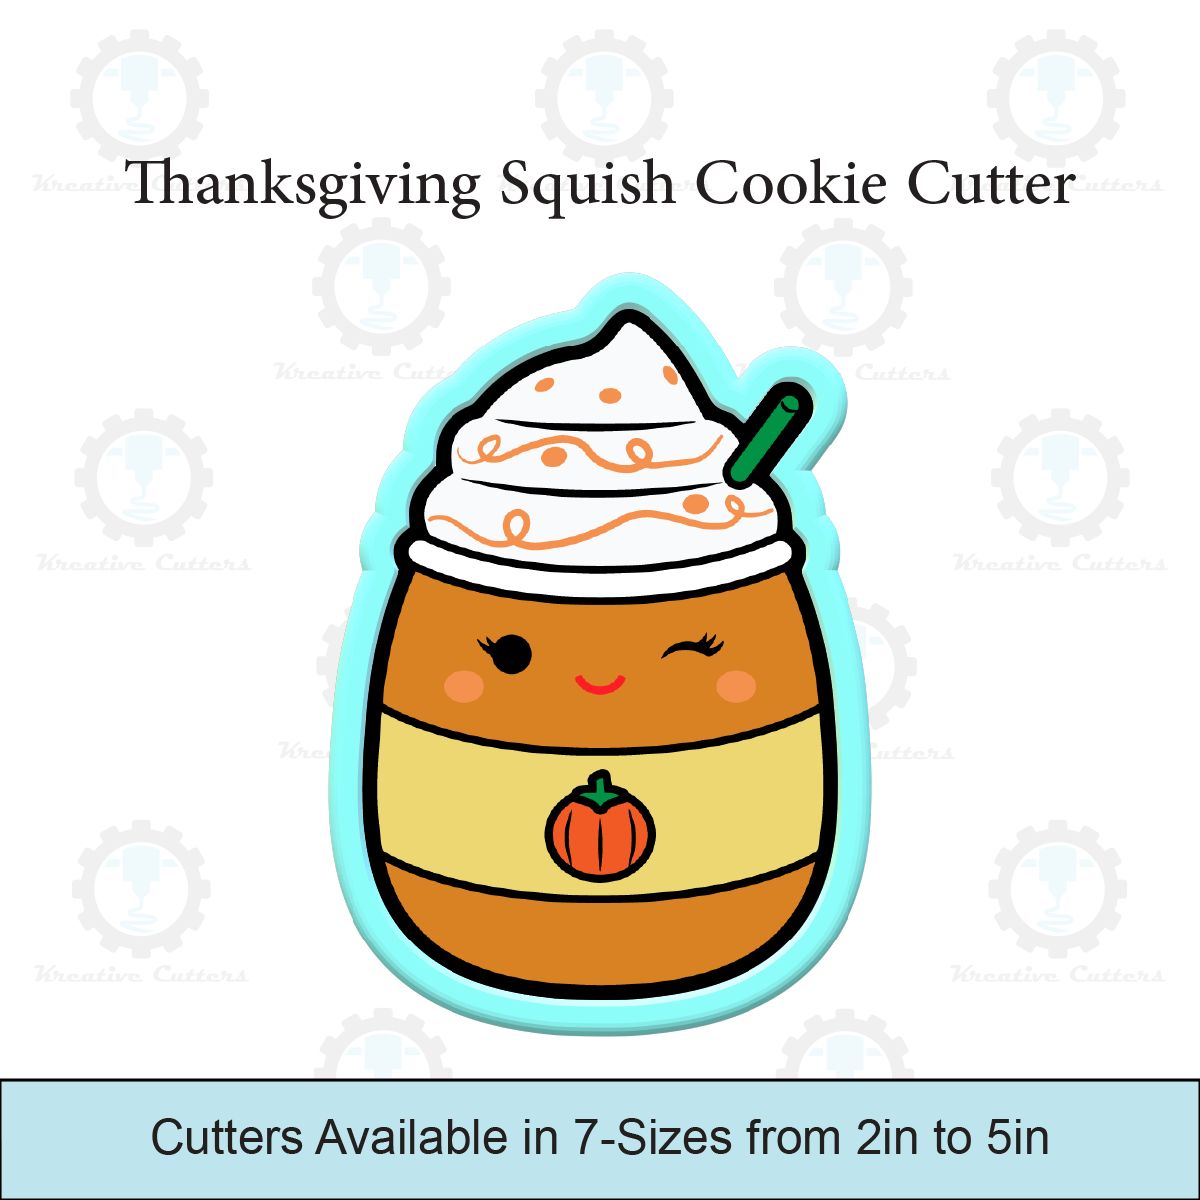 Thanksgiving Squish Cookie Cutters